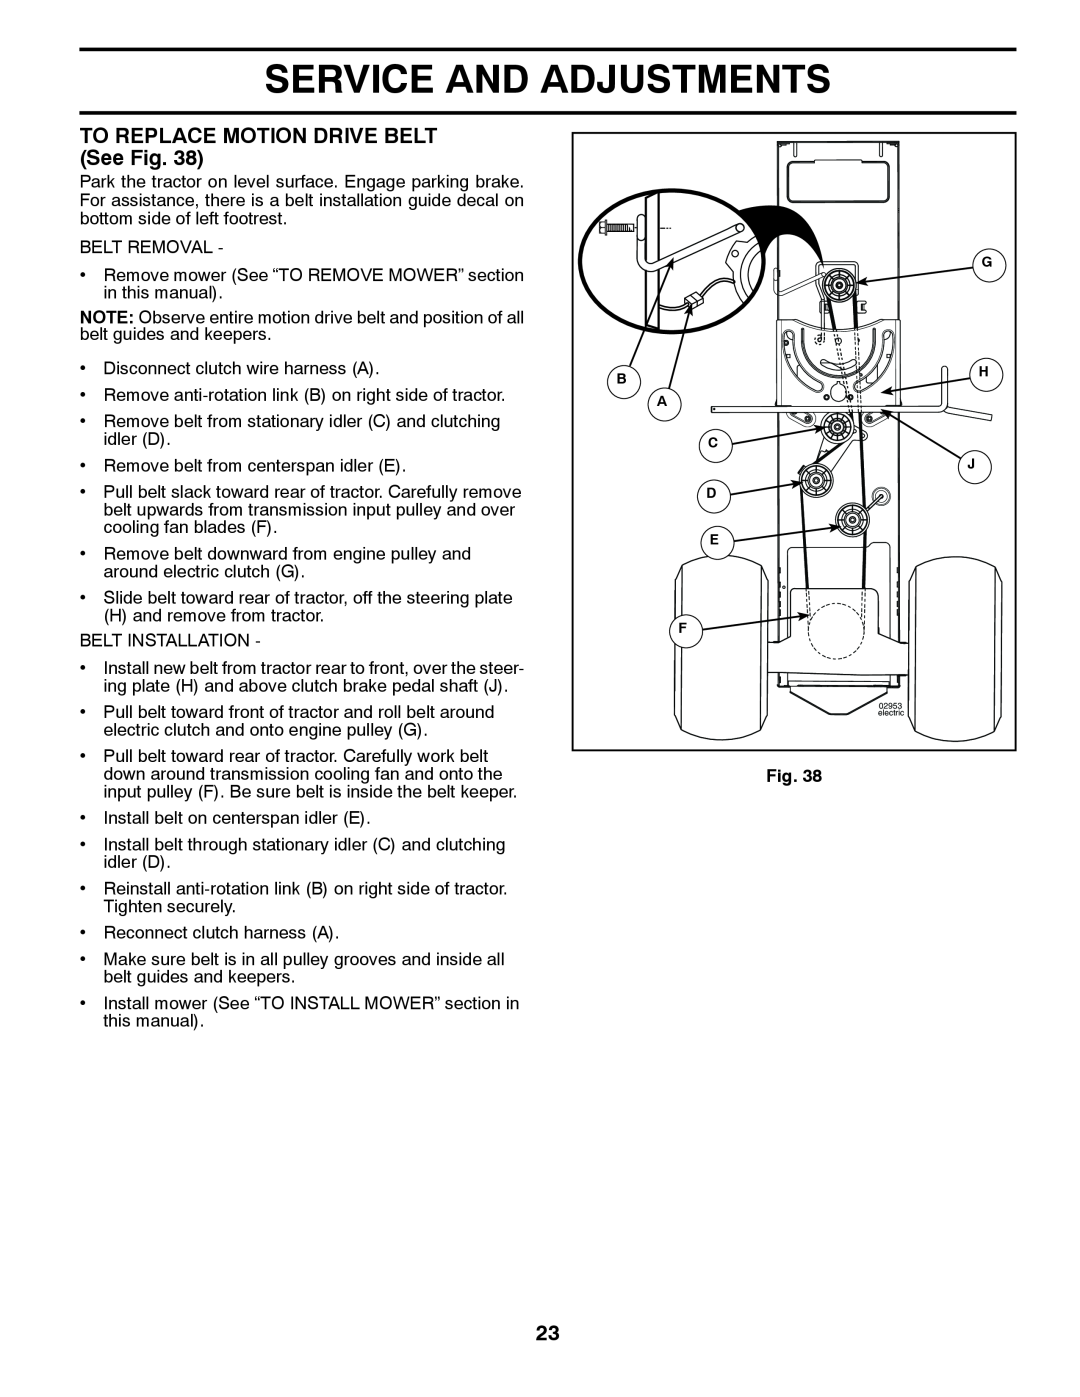 Husqvarna YTH26V54 owner manual Service And Adjustments, TO REPLACE MOTION DRIVE BELT See Fig 